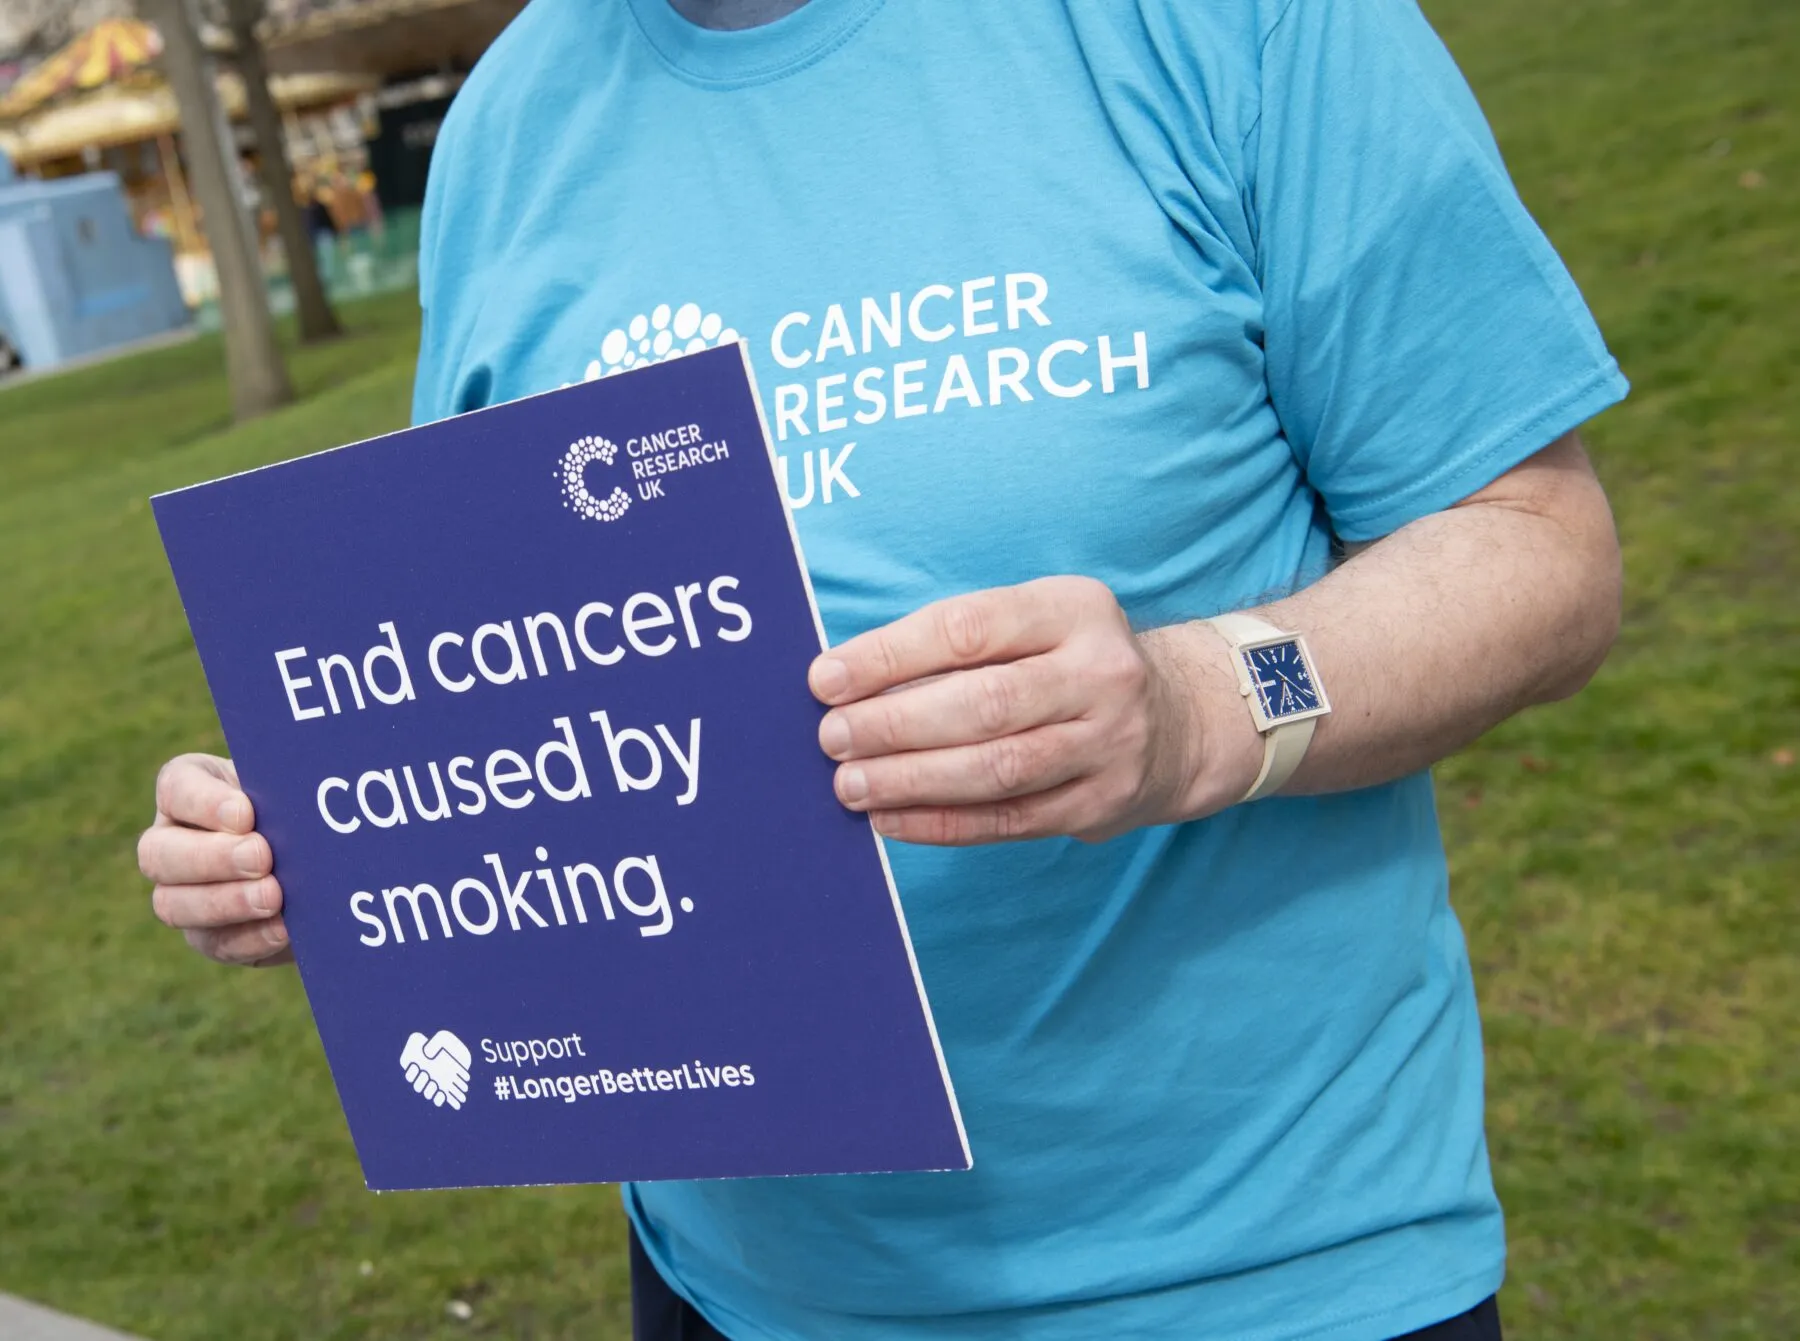 A campaigner in a Cancer Research UK t-shirt holding a sign that reads 'End cancers caused by smoking.'